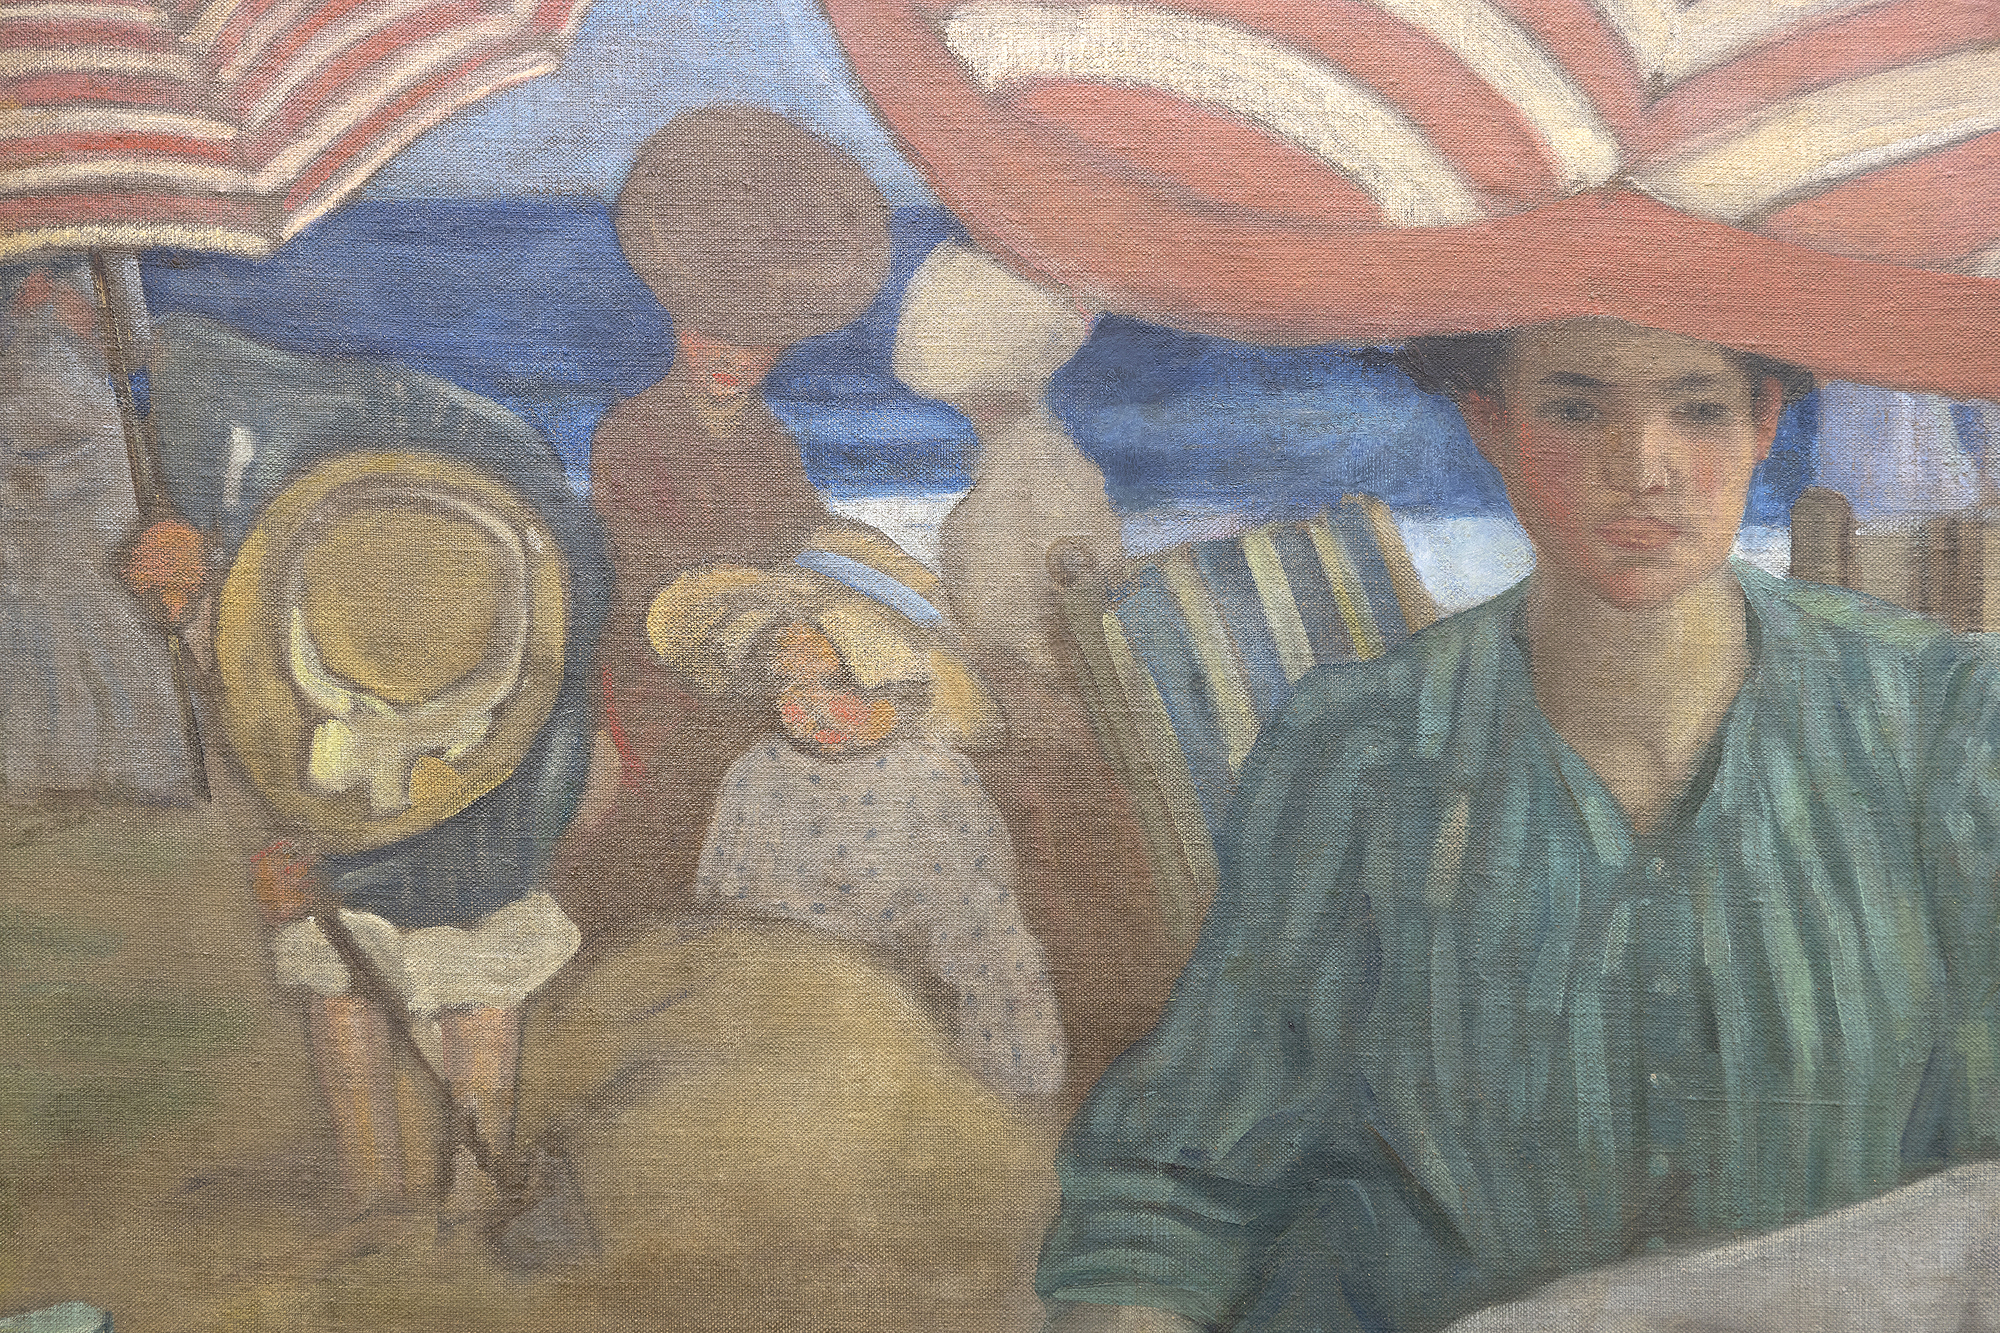 Frederick Frieseke is often regarded as the finest American Impressionist painter of the figure. Yet when he came to study at Académie Juilian in 1898, several les Nabis painters remained a lingering presence, and it was the rich, decorative patterns of Edouard Vuillard and Pierre Bonnard that served as the blueprint for his early success. That influence is clearly demonstrated in the unrestrained repetition of the voluminous, pleated, striped umbrellas of Afternoon at the Beach, a canvas mural installed in the opulent Hotel Shelburne dining room overlooking the Atlantic City Boardwalk. The unifying impact of that repetitive element imbues the setting with cloud-like loft within a color scheme, evoking Vuillard and the richness of a Gobelin tapestry, rather than the effect of sunlight and broken color that mark his more familiar paintings from the decade of 1910 to 1920.<br><br>Afternoon at the Beach was installed under the artist’s direction in February 1906. It remained on view for decades at the swanky hotel that enticed “Diamond Jim” James Buchanan Brady to pay one thousand dollars a week for permanent residence and was an unfading memory for throngs of well-heeled socialites, financiers, and notables from Irving Berlin to John Philip Sousa and Ethel Barrymore to Al Jolson. Undoubtedly, its presence high on the grand dining room wall contributed to the artist’s popularity and renown.<br><br>Today, we may look upon this long, frieze-like composition as a delightful fin-de-siécle costume study or an informative expose of Victorian mores as suggested by the separate spheres of gender groupings. But mostly, Afternoon at the Beachrecounts the artist’s unbridled delight and appreciation of women, here, expressed within familial, maternal, and social contexts. It is the subject and theme that brought Frieseke acclaim and awards on both sides of the Atlantic and which, to this day, endears him to the many who count him among the most beloved of American figurative painters.